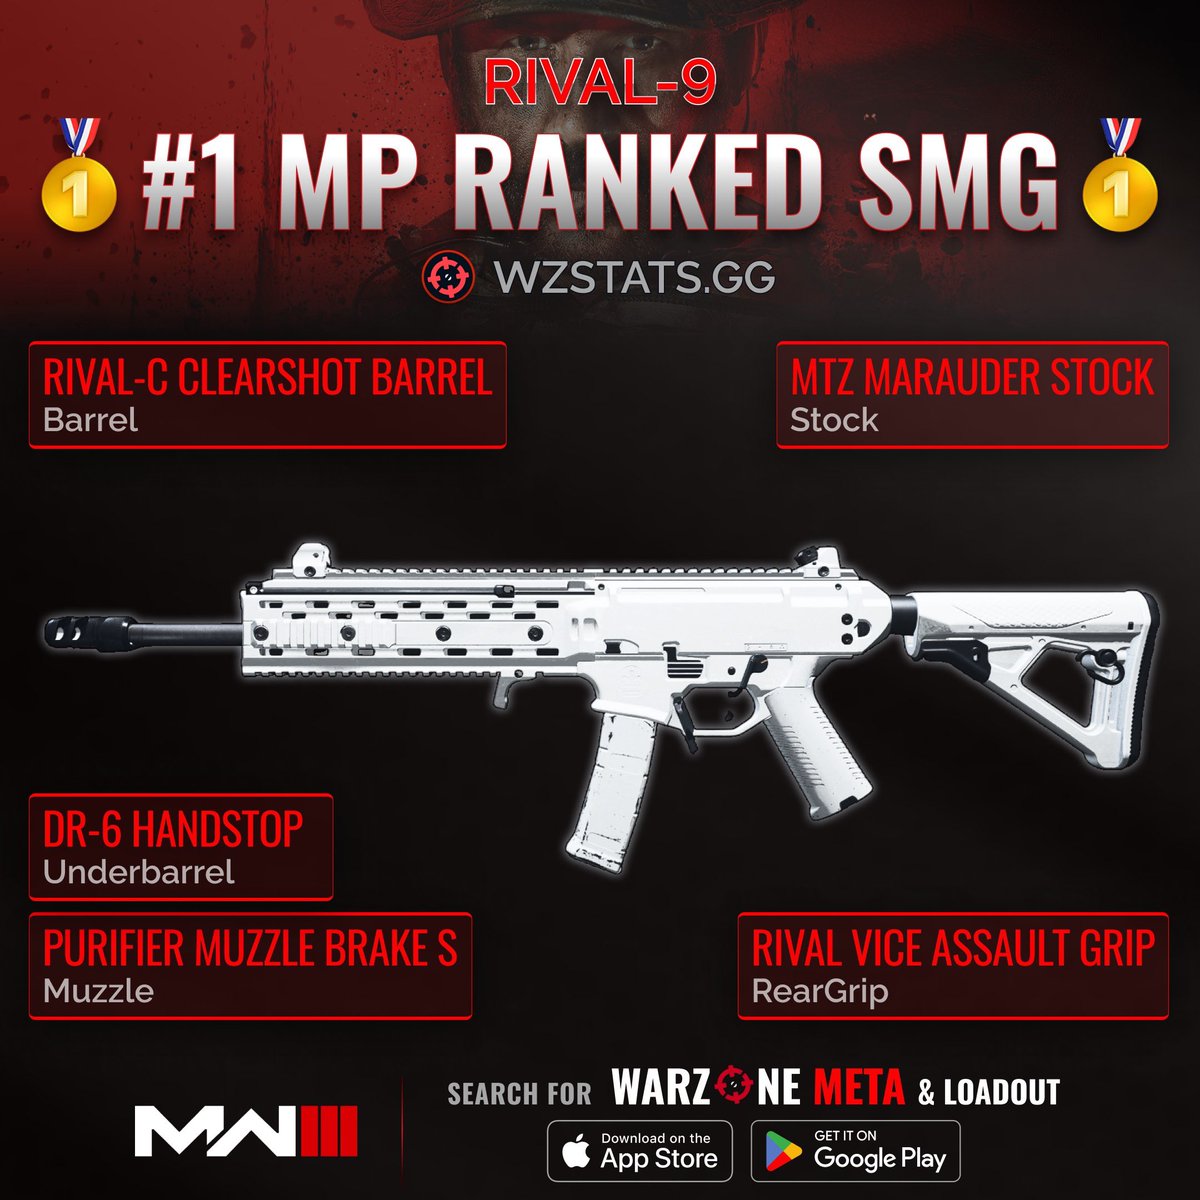 ‼️🚨 MW3 MP RANKED PLAY META 🚨‼️

👑 Best 2 Meta Guns in #MW3 Multiplayer Ranked Play after today’s update!

🥇 #1 Meta AR: MCW (Only AR)
🥇 #1 Meta SMG: Rival-9

🫡 Get all Ranked Play Meta Loadouts on the Warzone Meta & Loadout app!